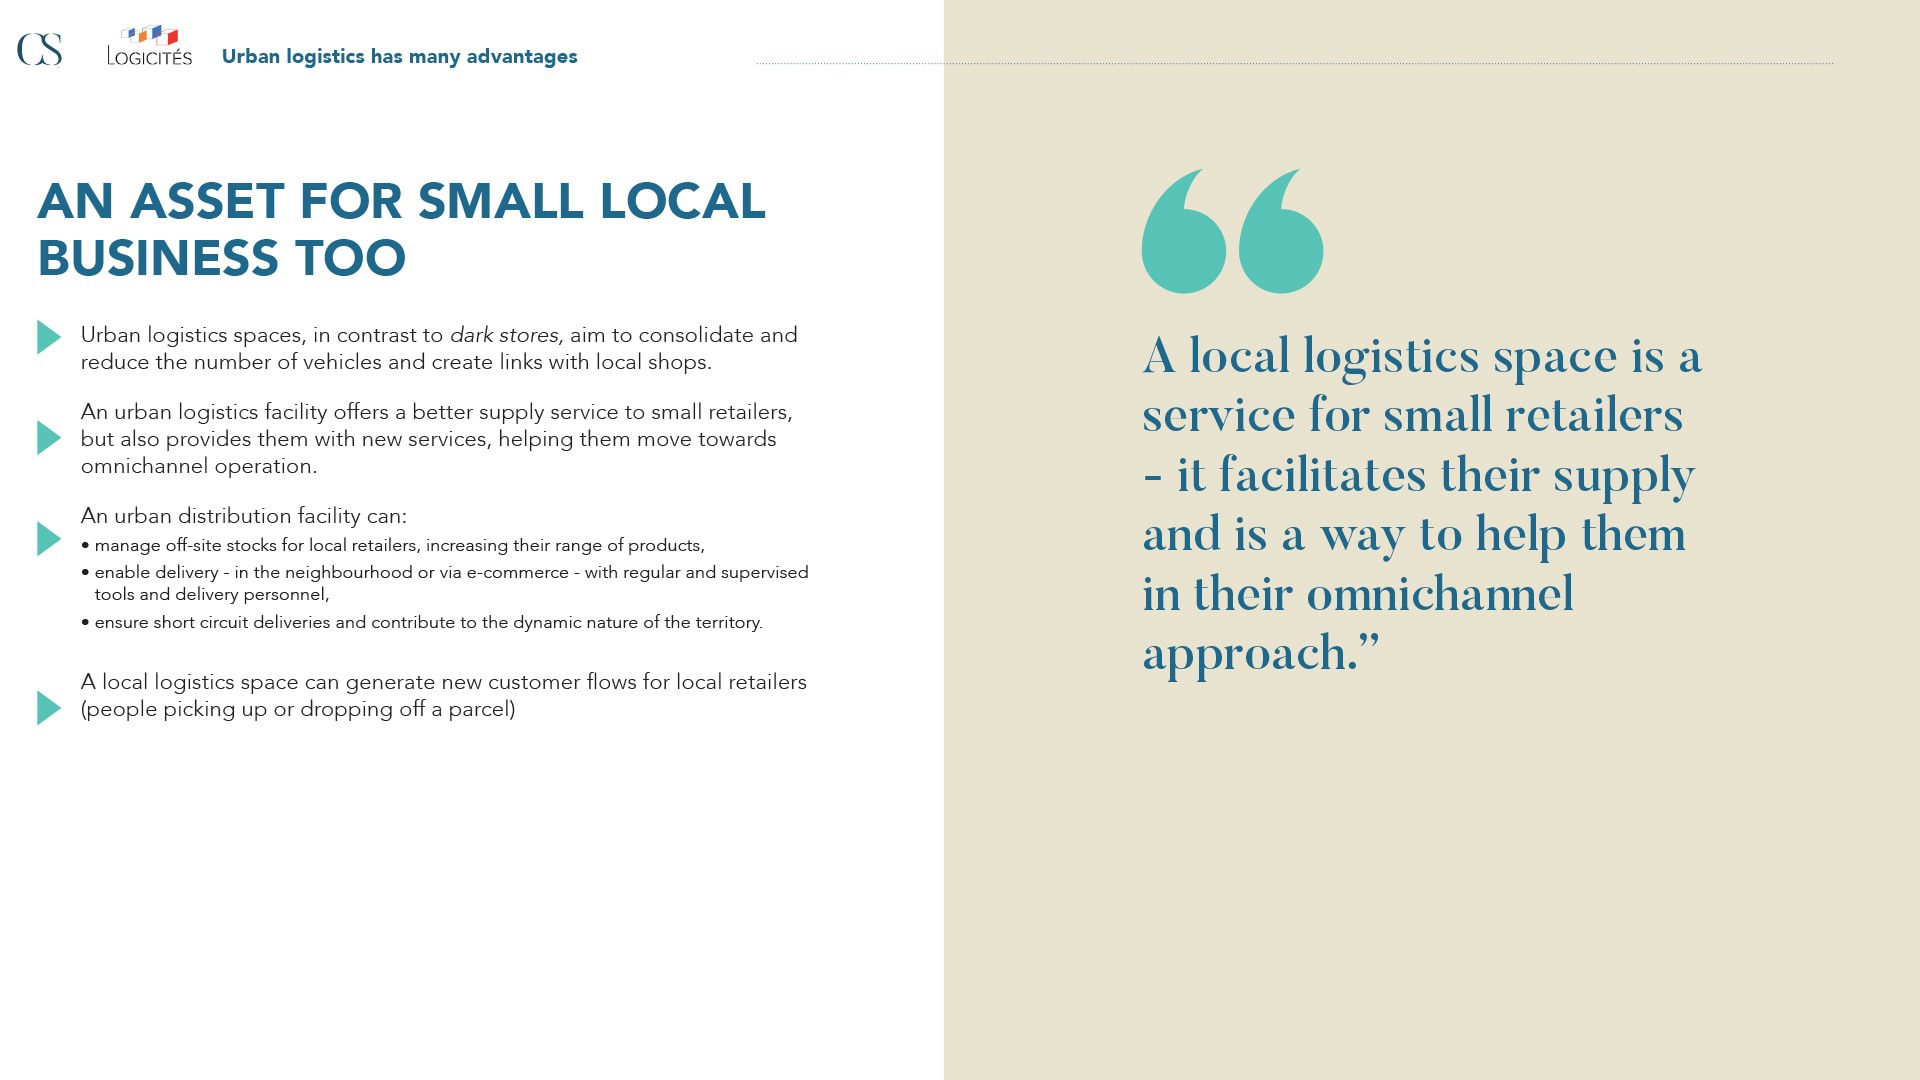 An asset for small local business too